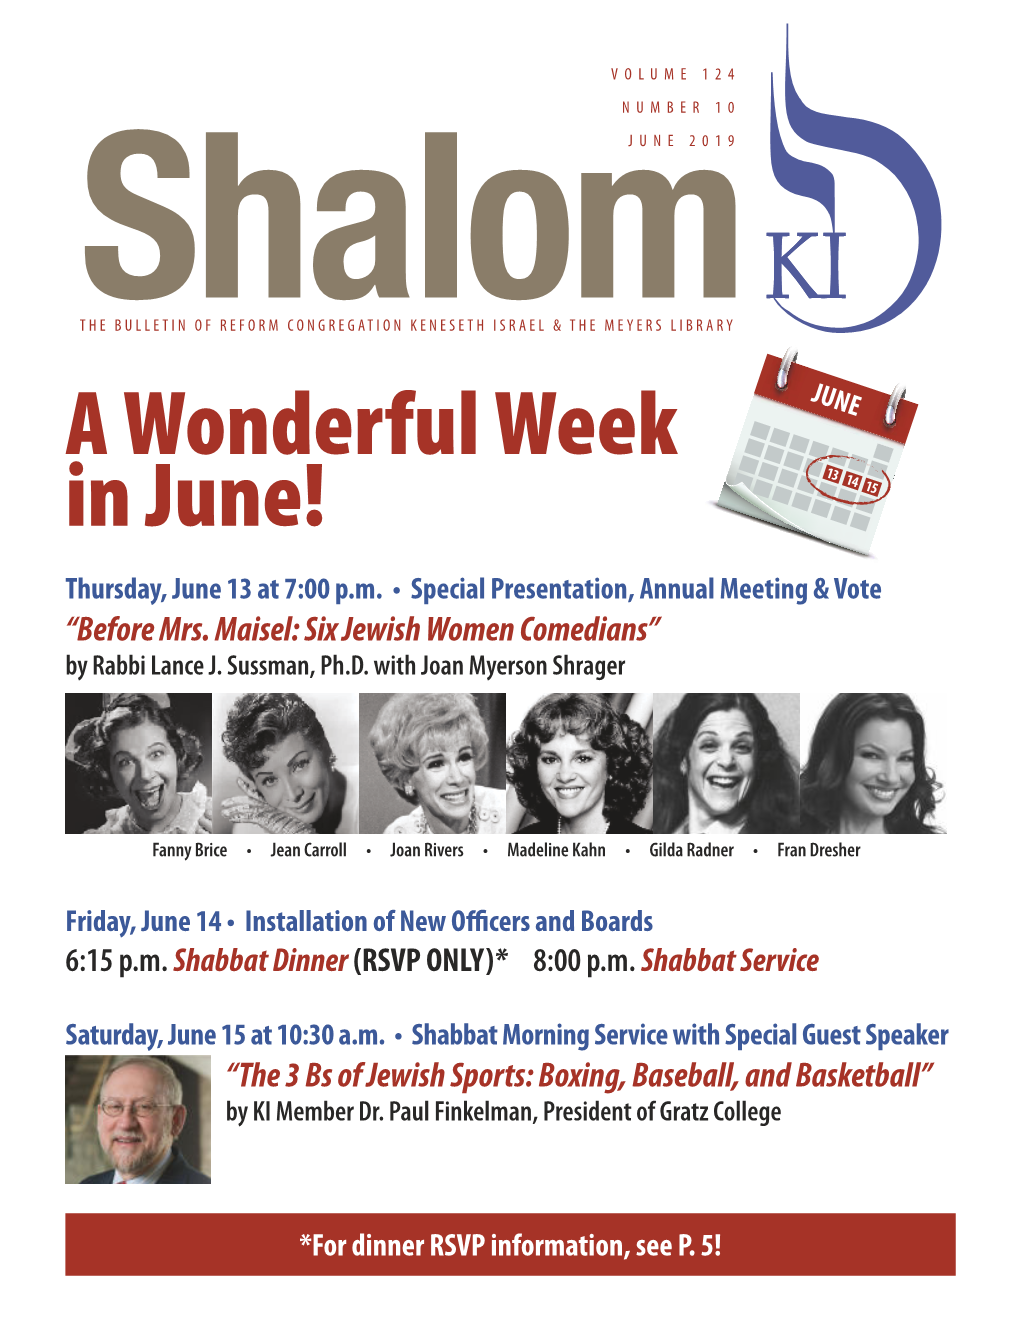 A Wonderful Week in June! Thursday, June 13 at 7:00 P.M